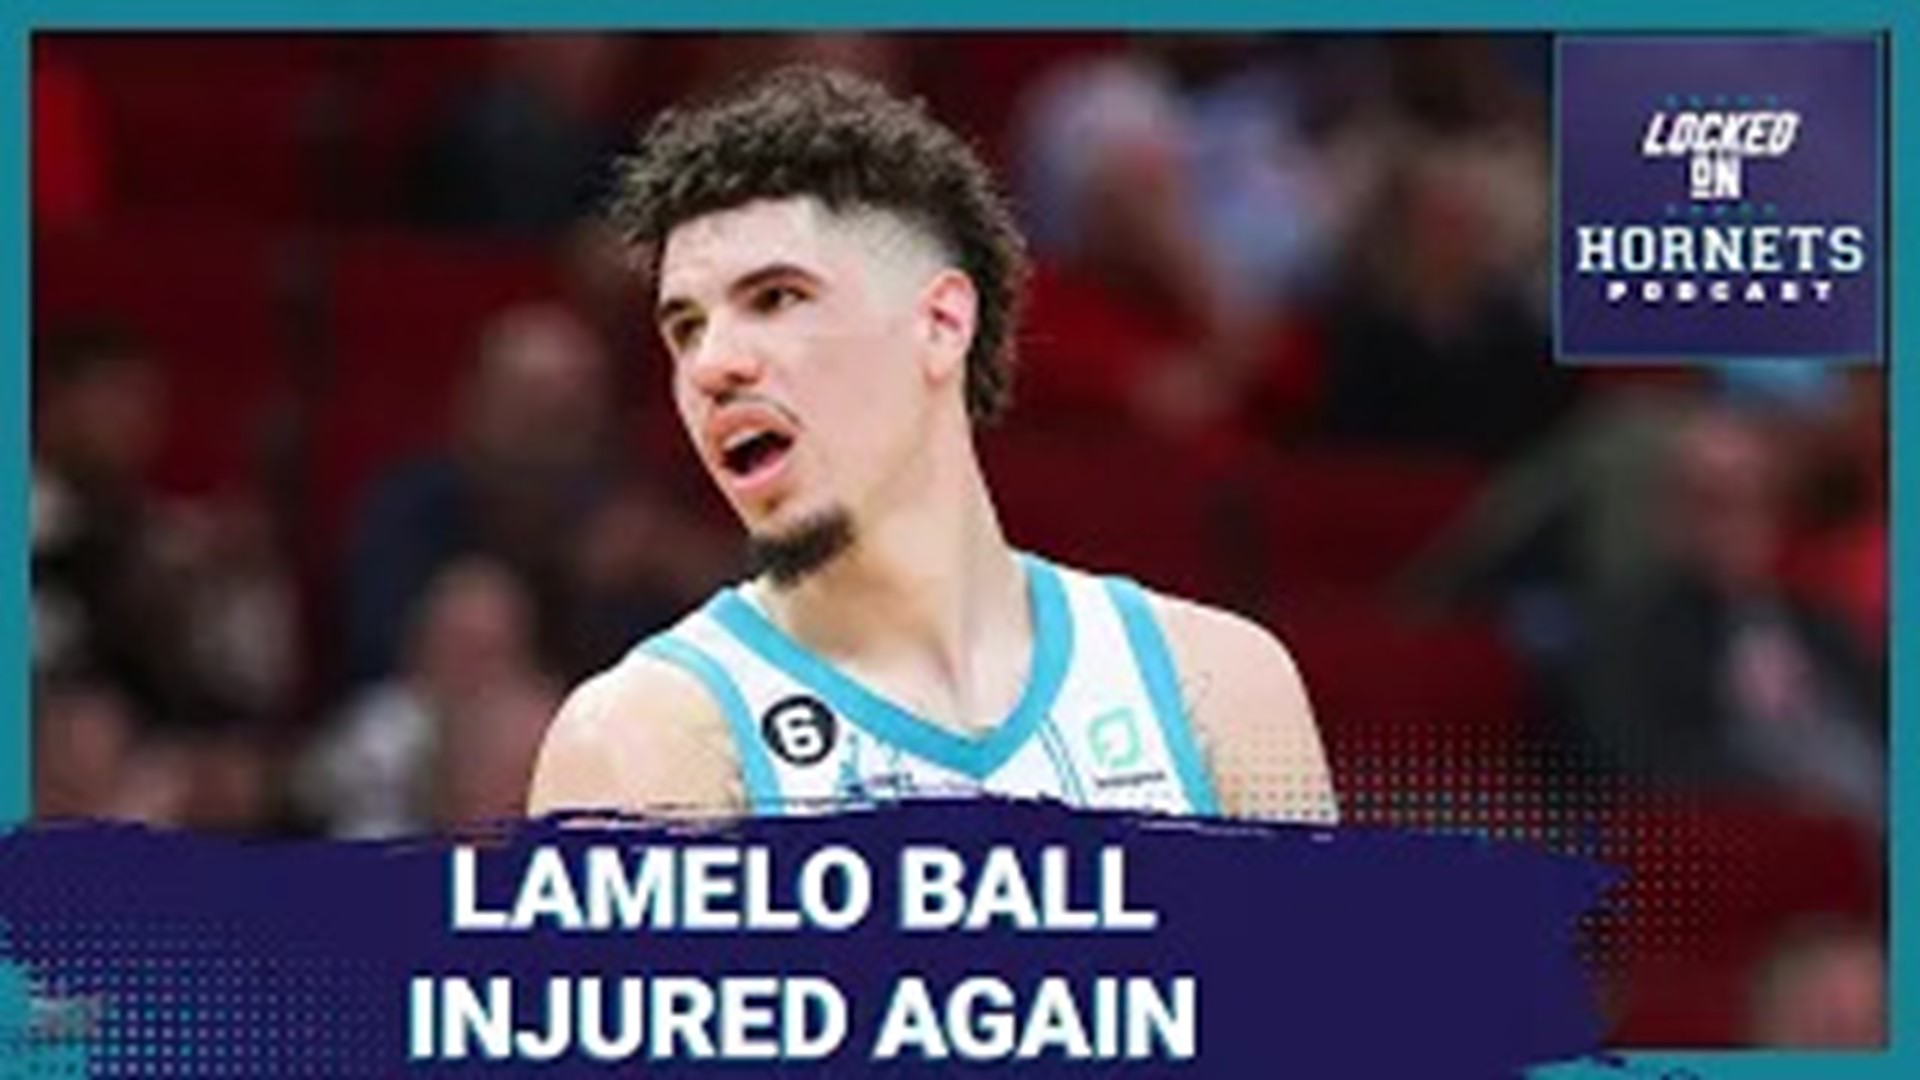 Another freak accident results in a major ankle turn and another turn for the worse in a Charlotte Hornets season full of them. That and more on Locked On Hornets